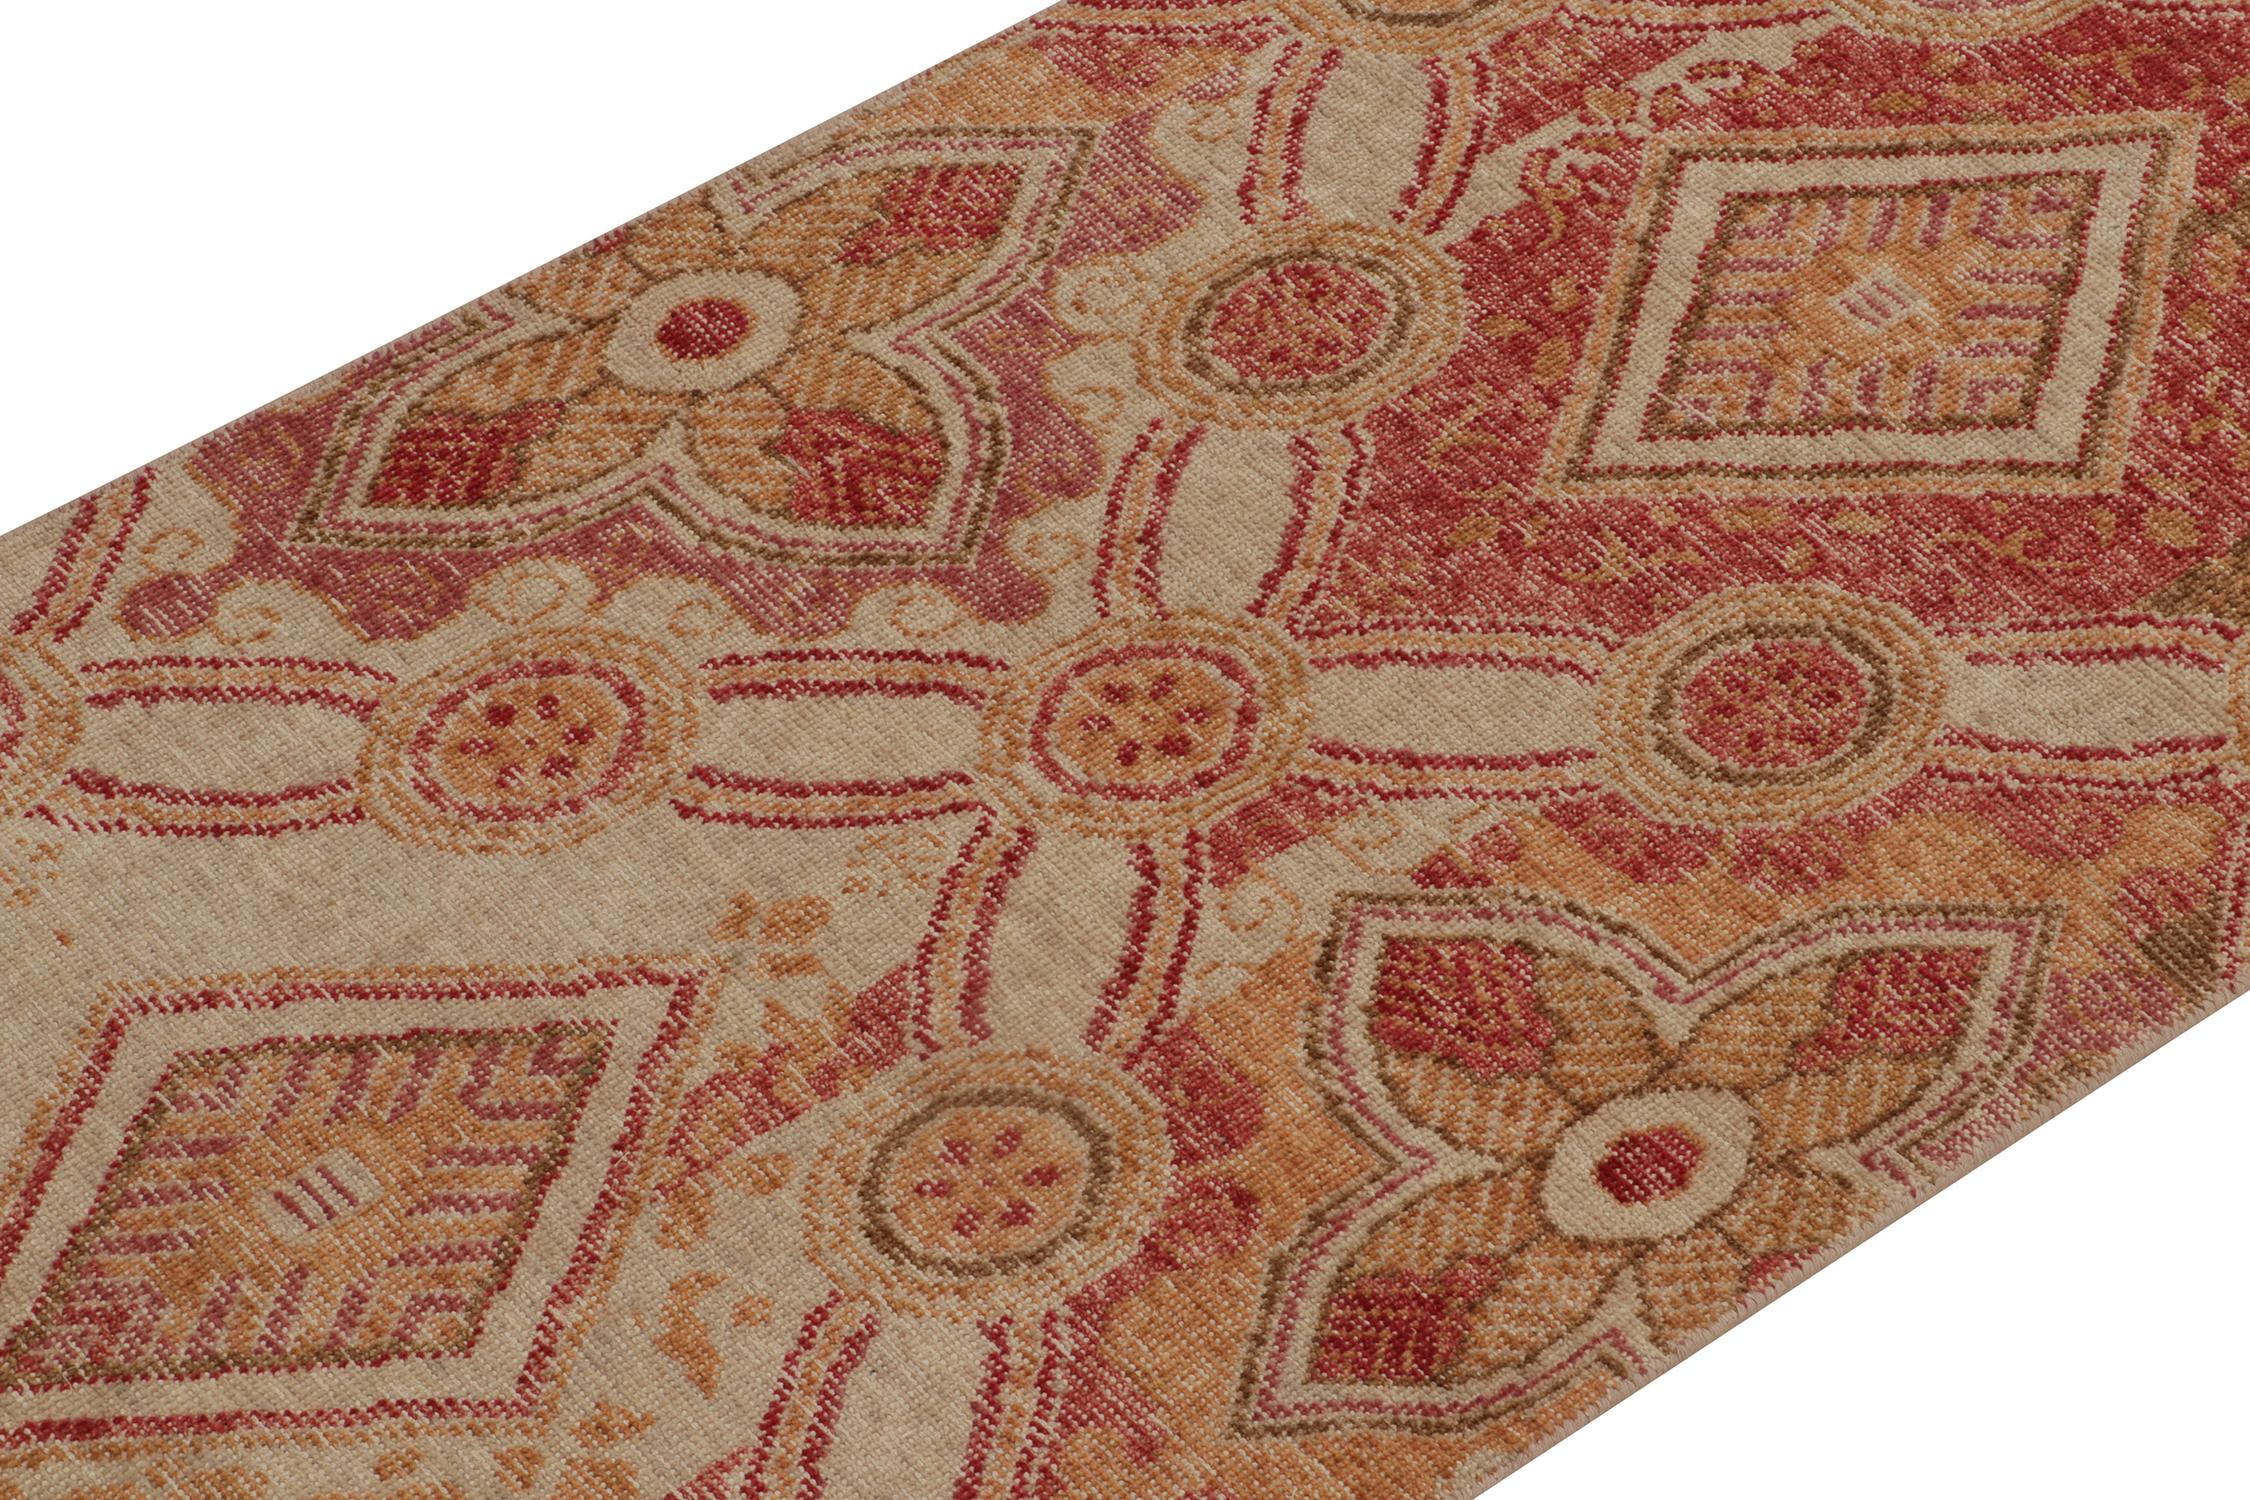 Hand-Knotted Rug & Kilim’s Distressed Style Runner in Red, Gold and Beige-Brown Trellises For Sale